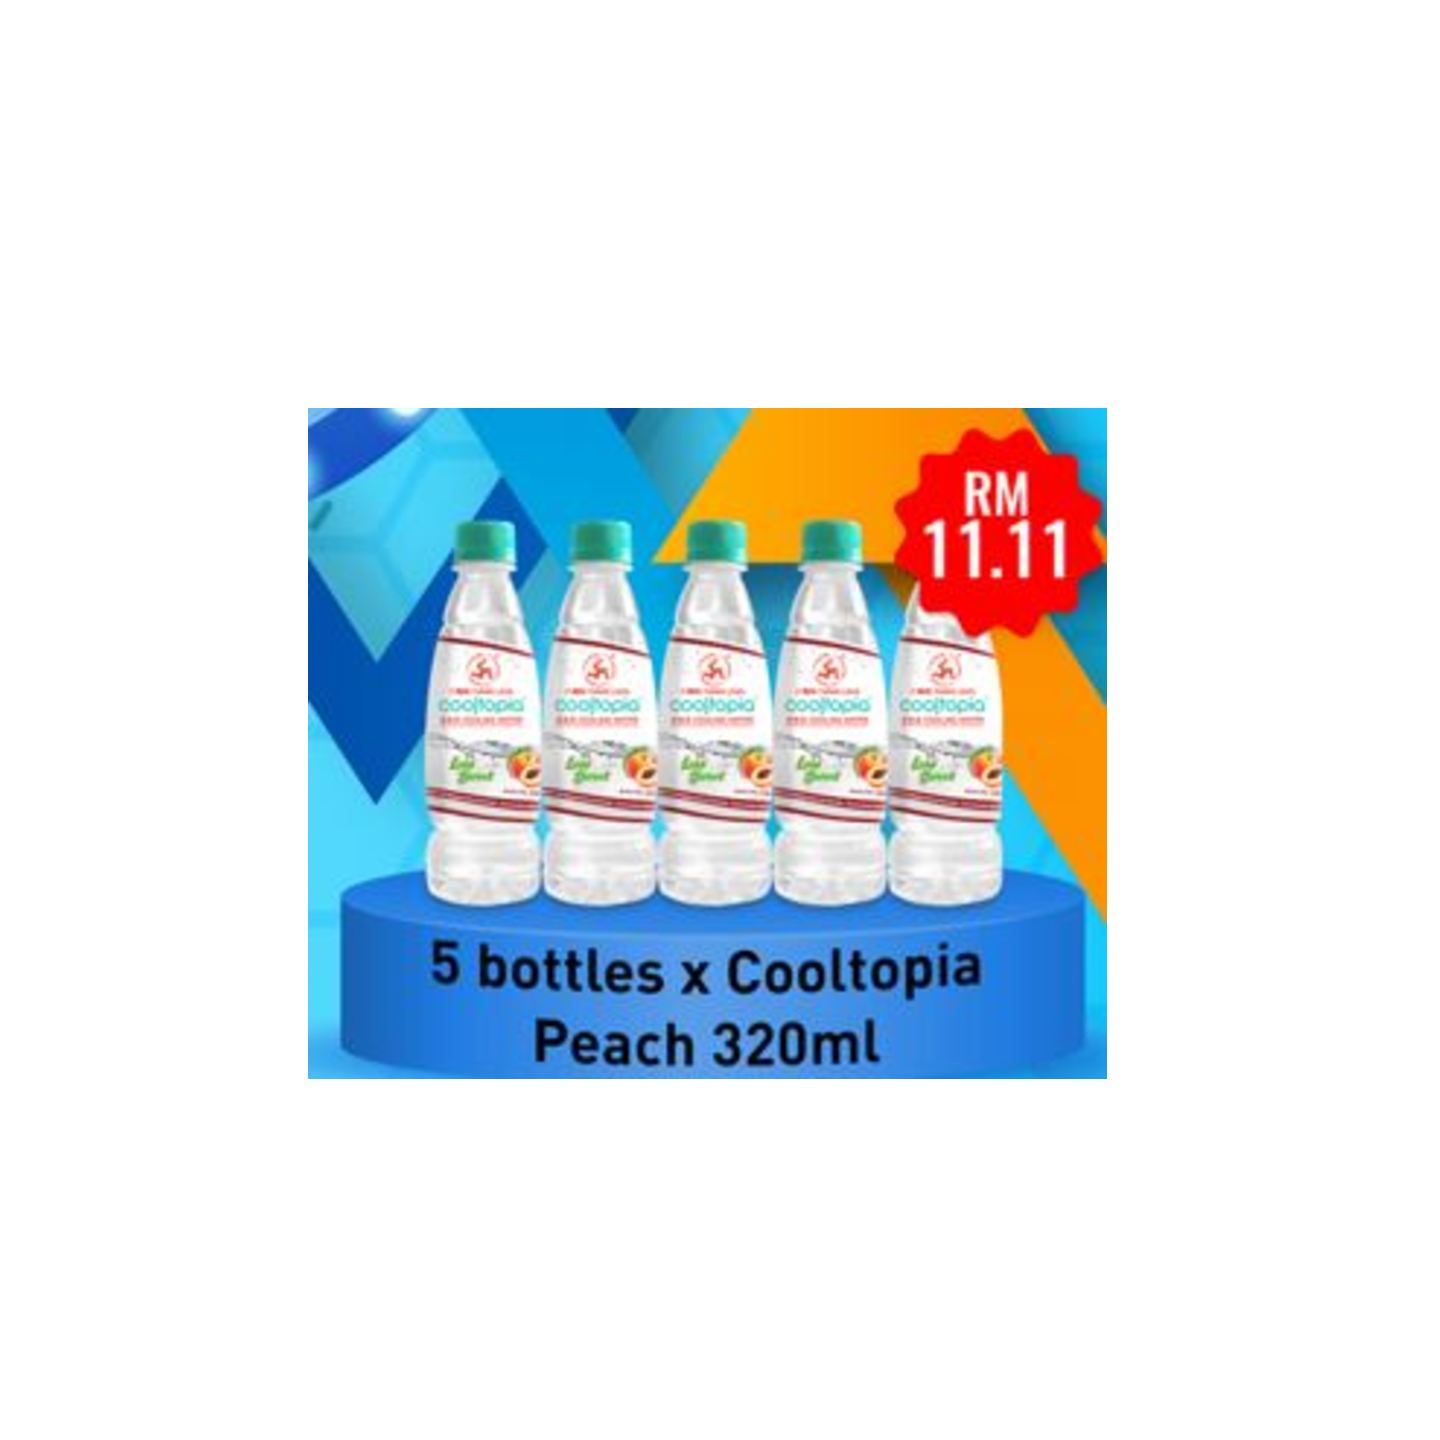 PACKAGE 6 : COOLTOPIA COOLING WATER - PEACH (LESS SWEET) - 320ML x 5